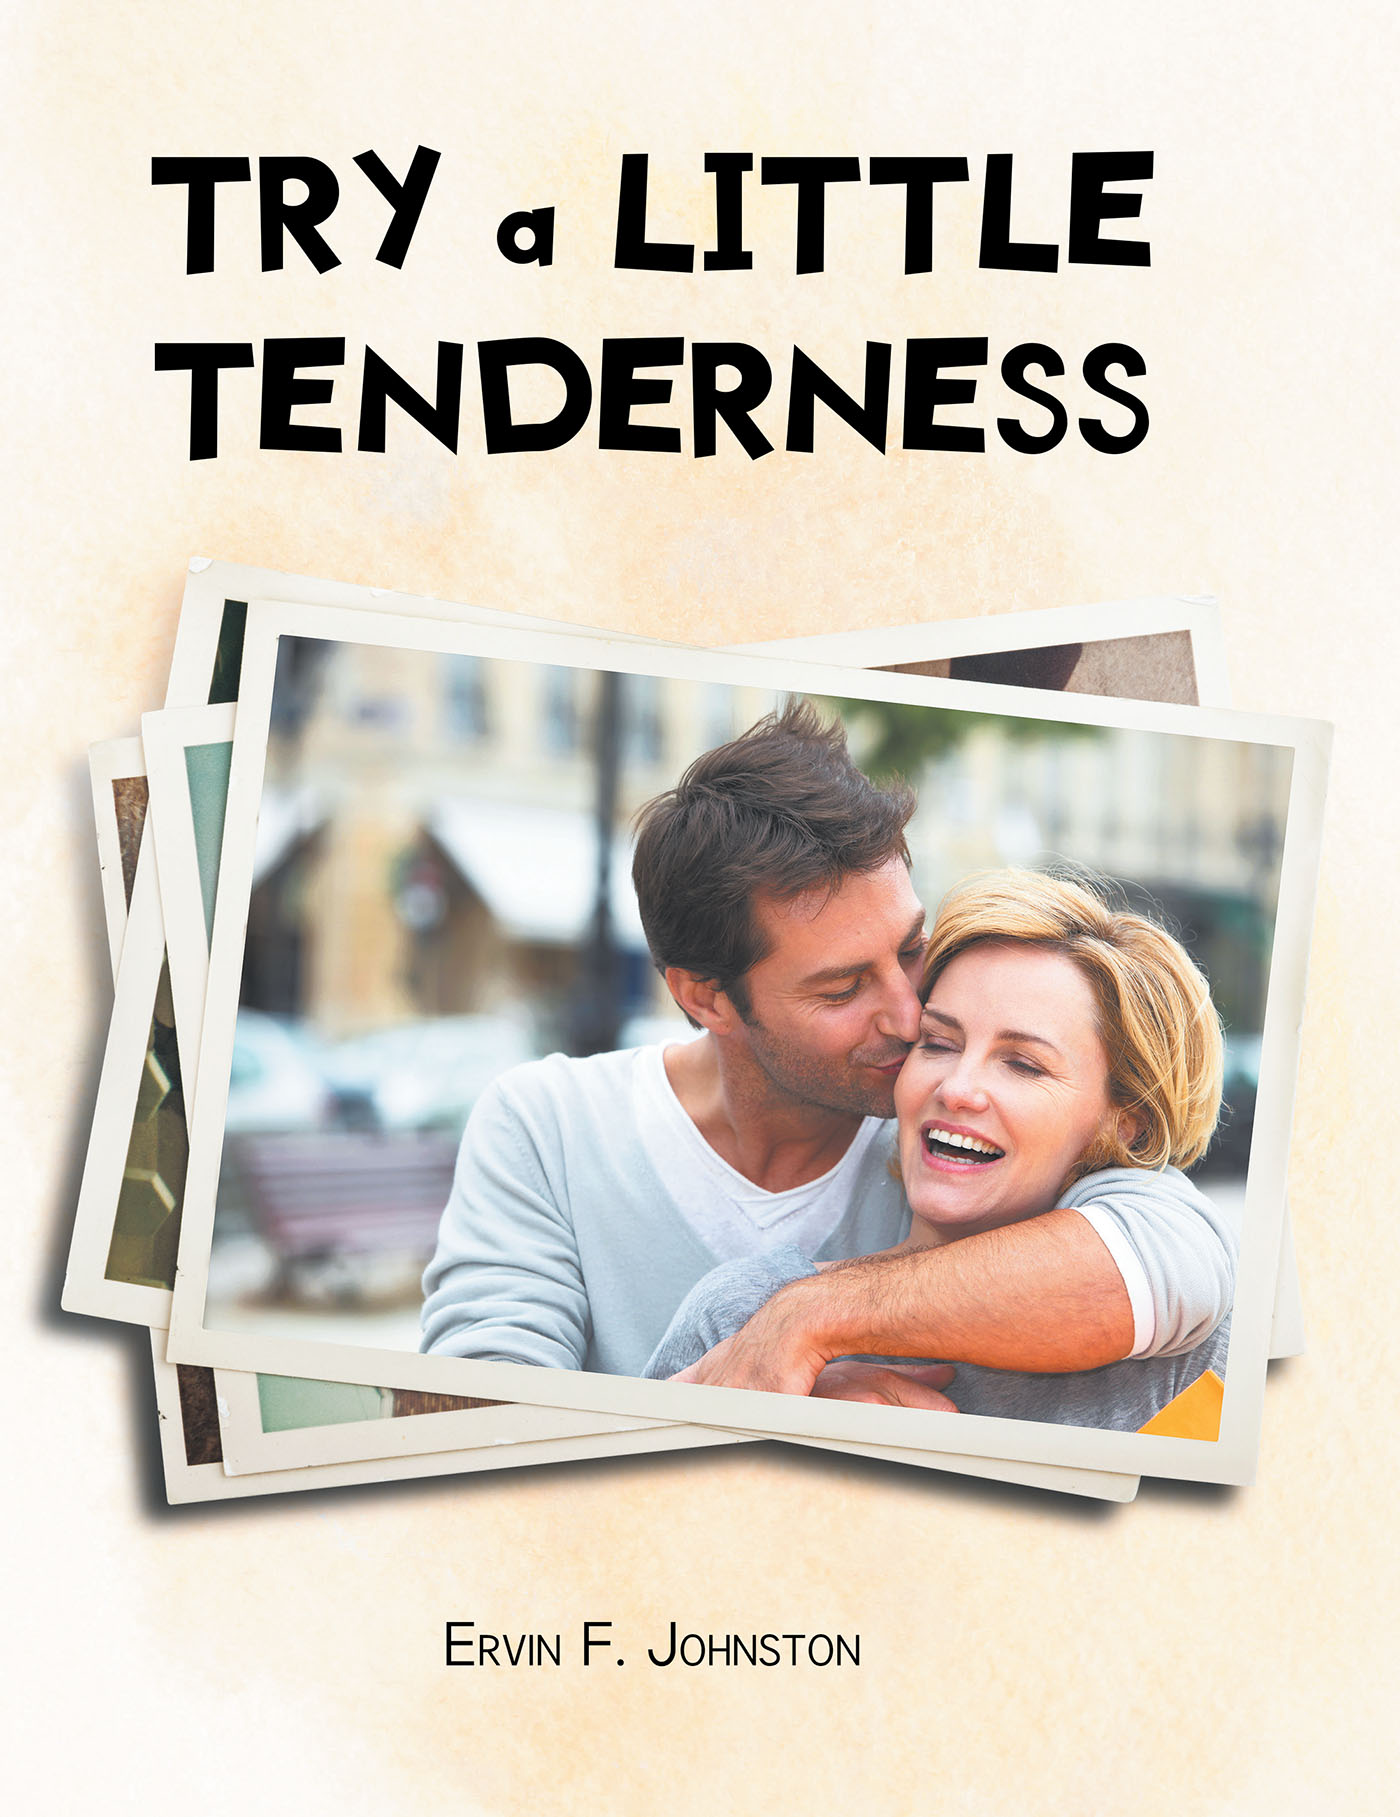 Author Ervin F. Johnston’s New Book, "Try a Little Tenderness," is a Collection of Heartwarming Vignettes Celebrating the Joy of Showing Kindness and Compassion to Others